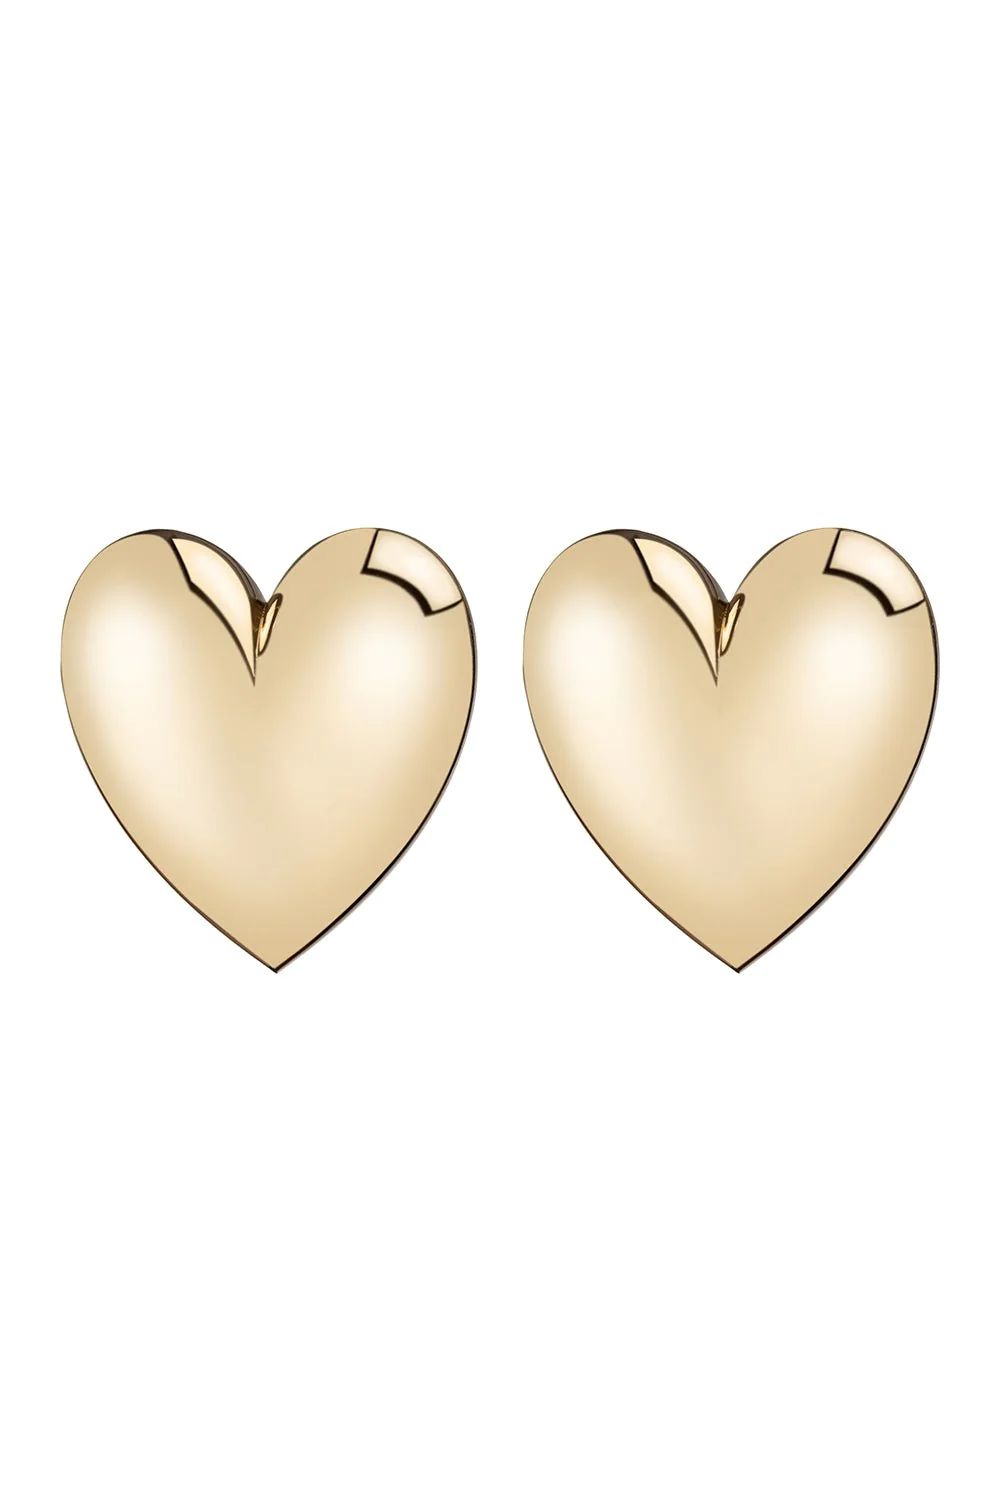 Puffy Heart Earrings | Marissa Collections